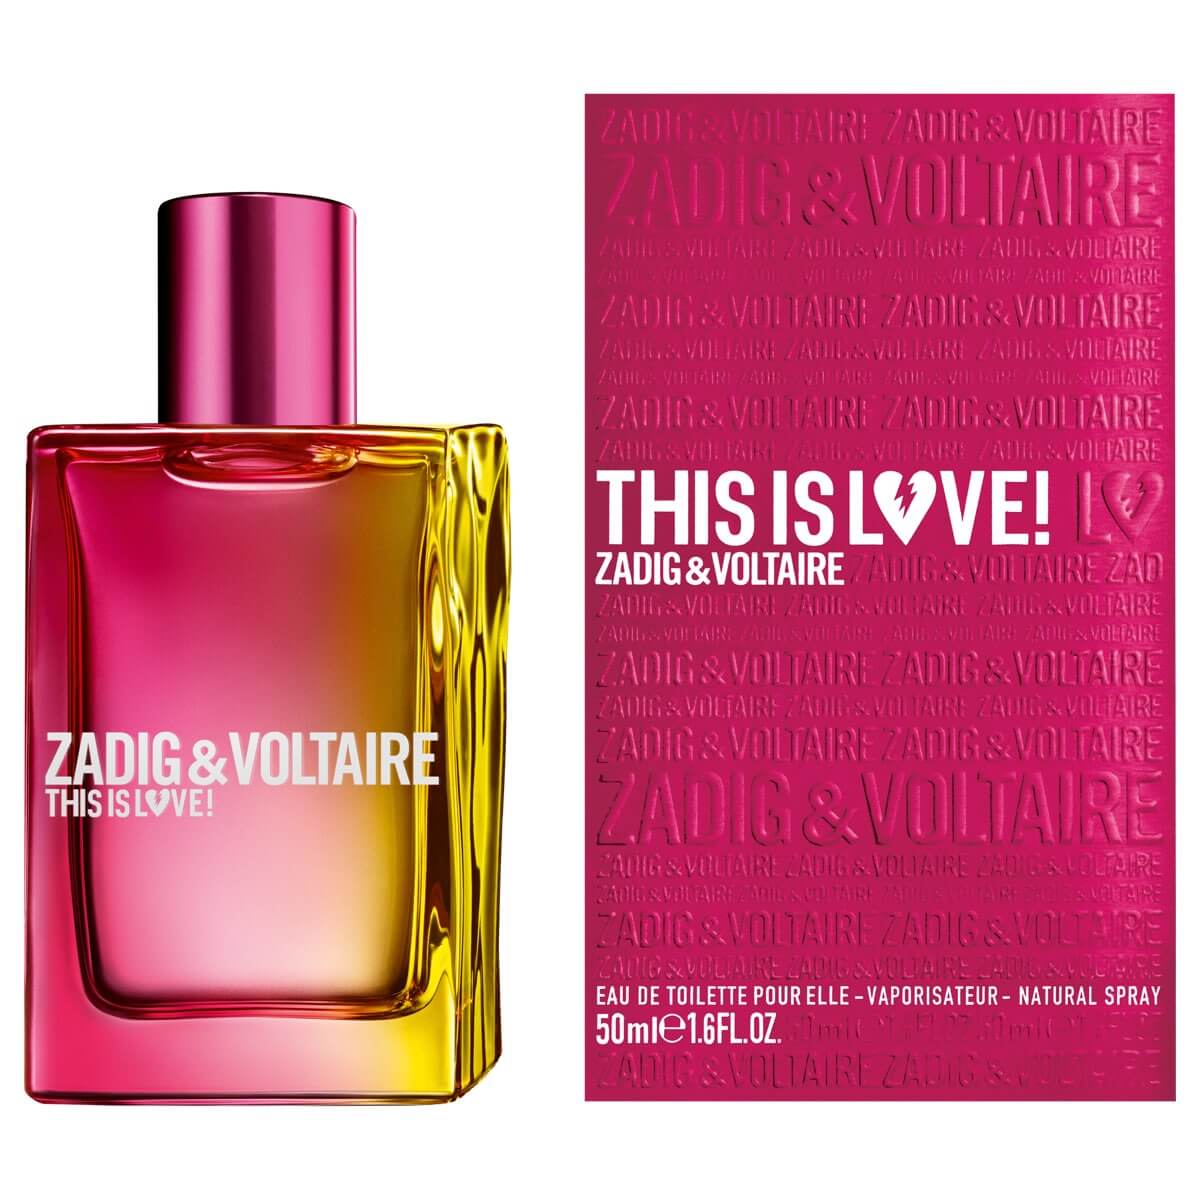 Z&V This Is Love For Her EDP 50ml / foto výrobce